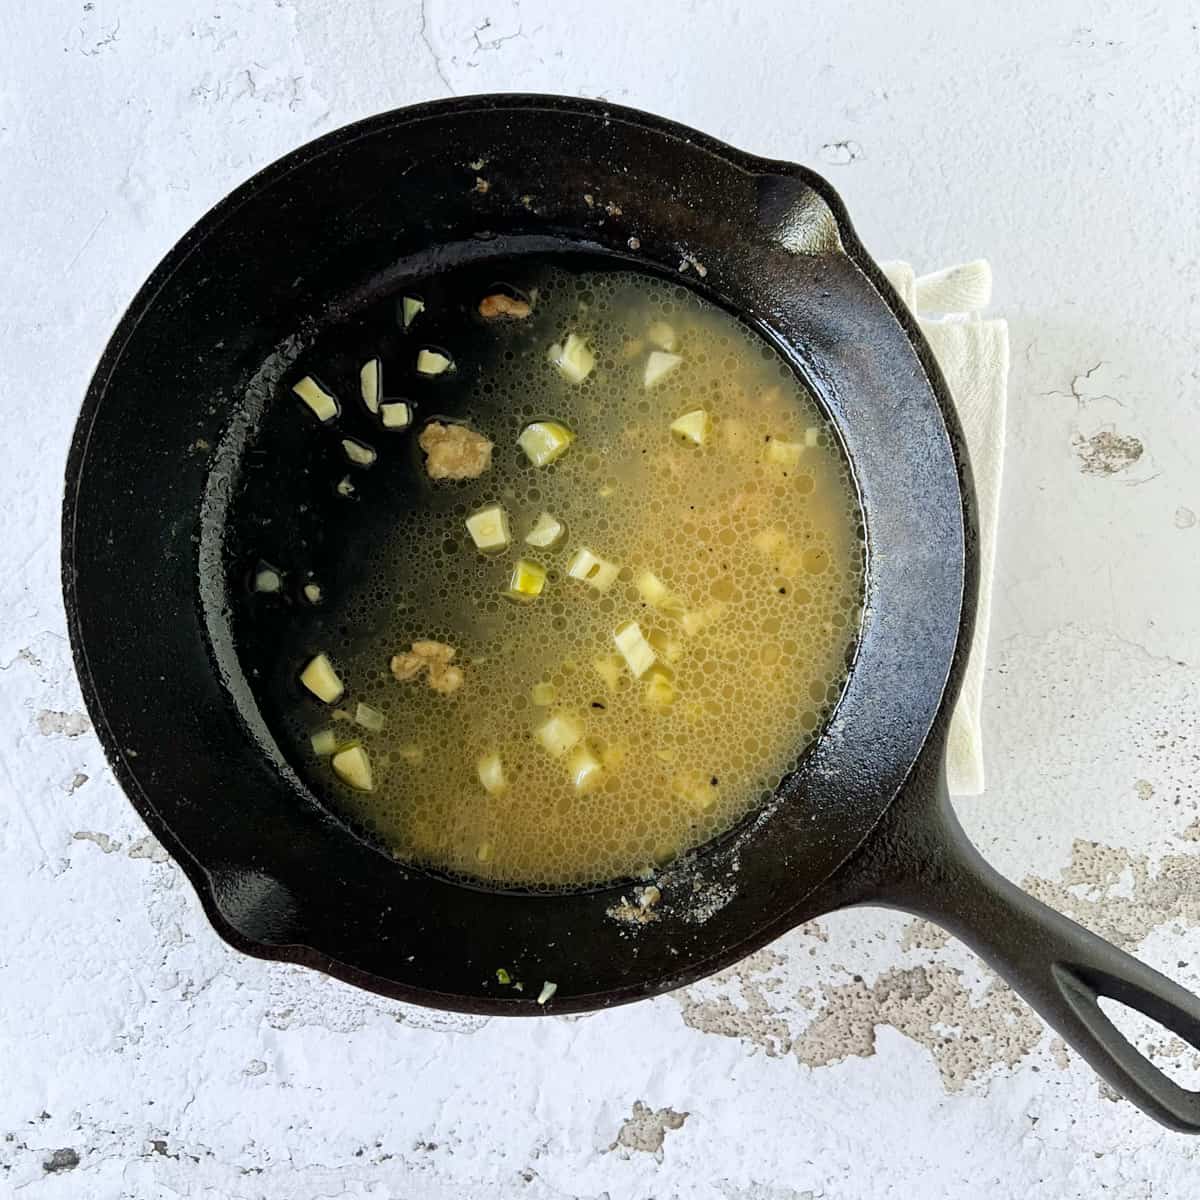 Chciken broth, lemon juice, and garlic simmering in a small cast iron skillet.